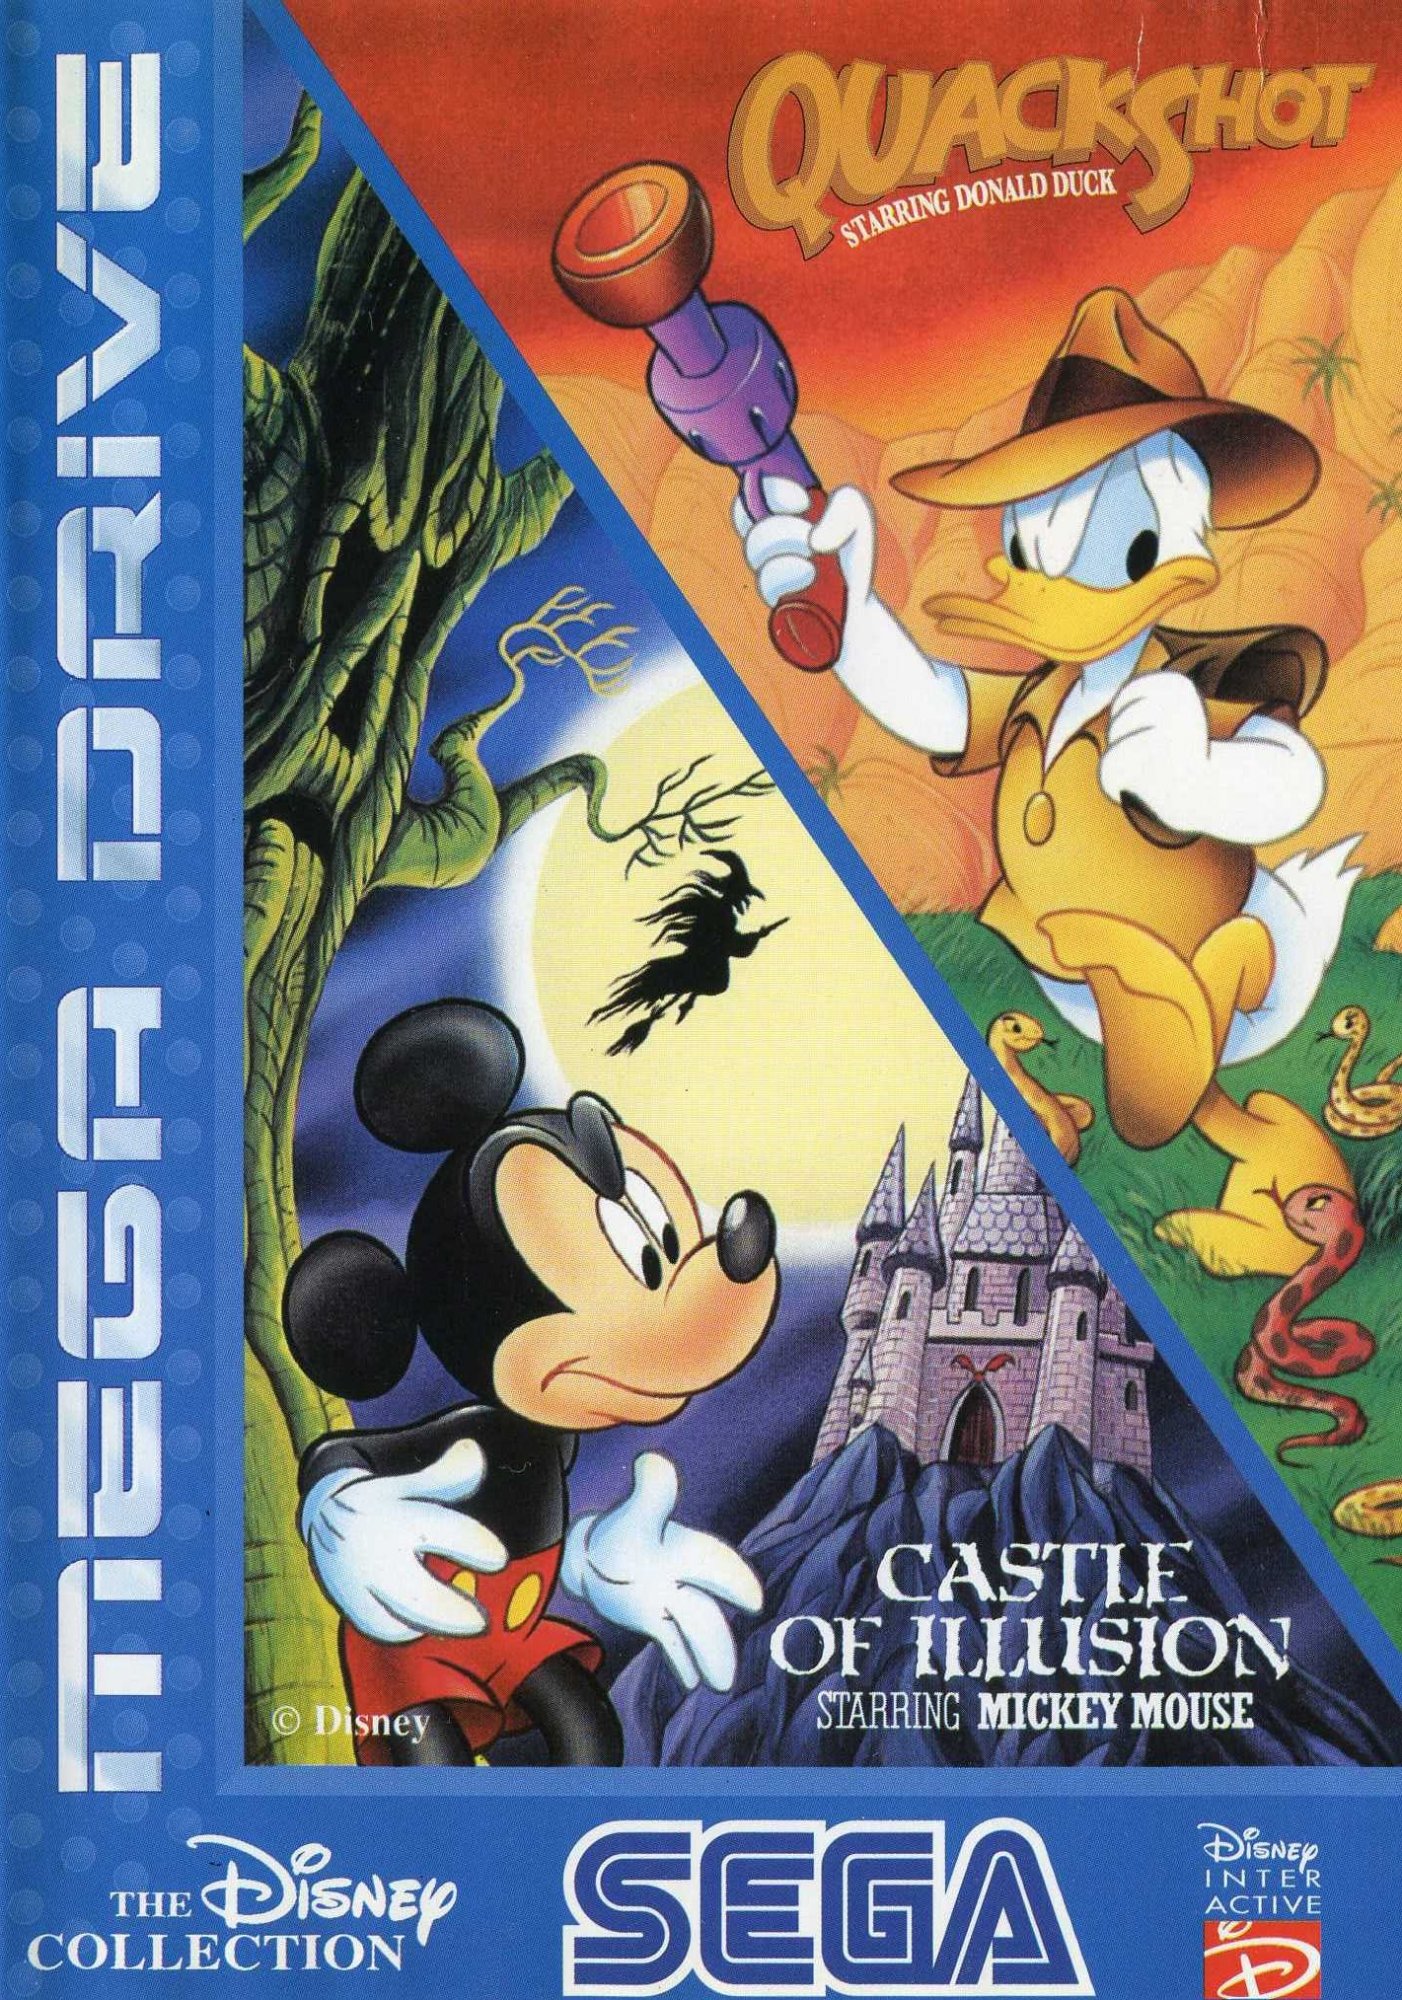 The Disney Collection: Quackshot Starring Donald Duck + Castle of Illusion Starring Mickey Mouse